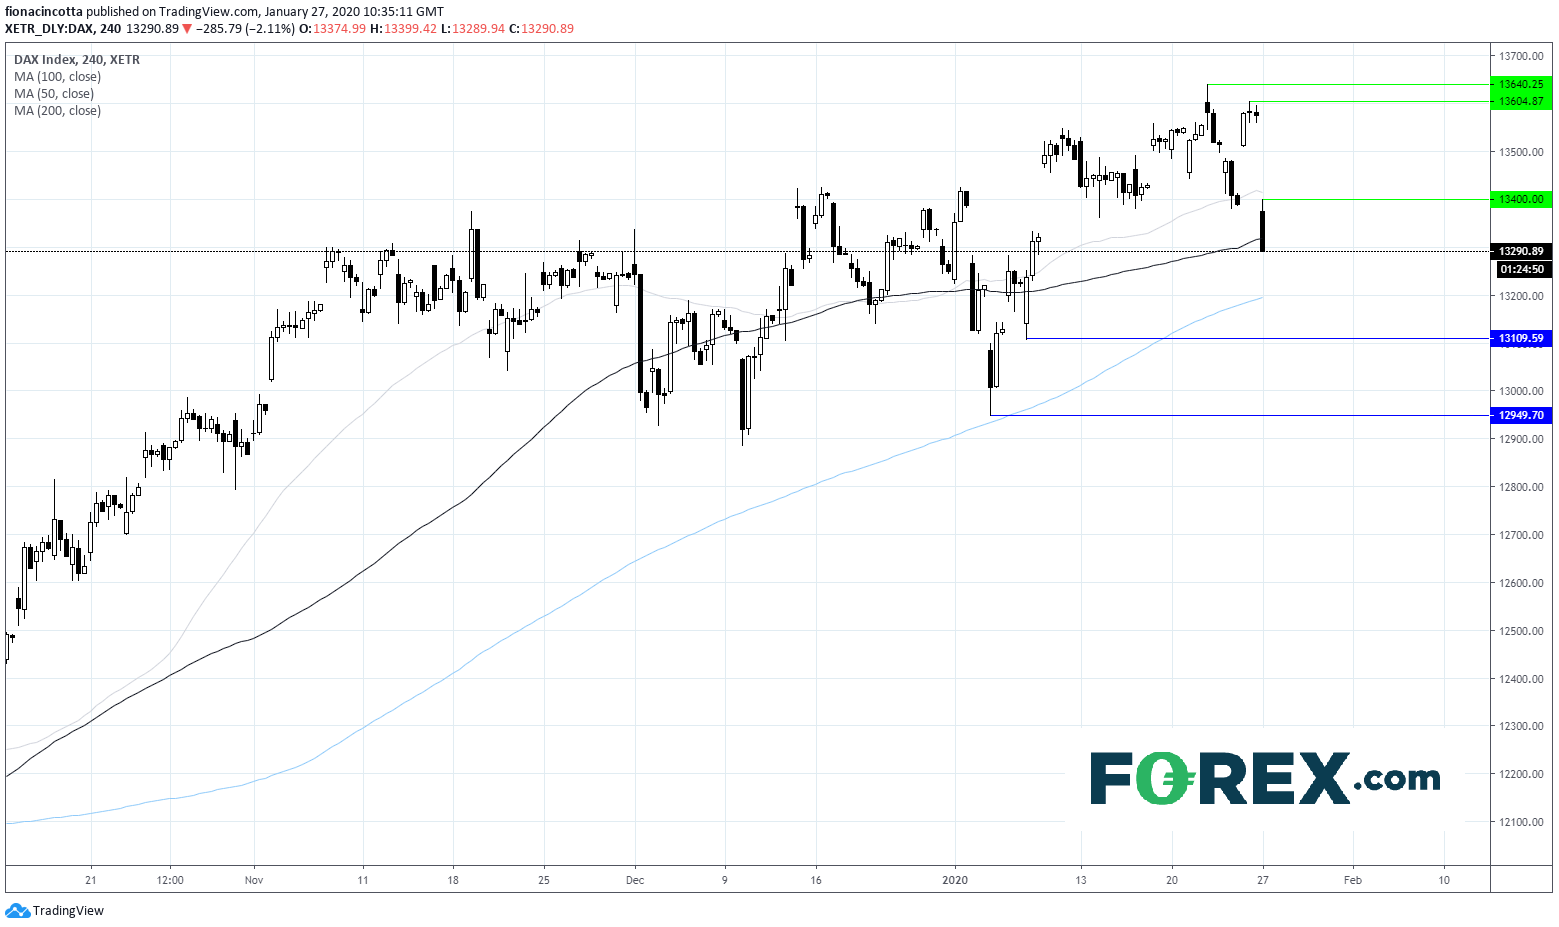 Chart analysis of DAX. Published in January 2020 by FOREX.com